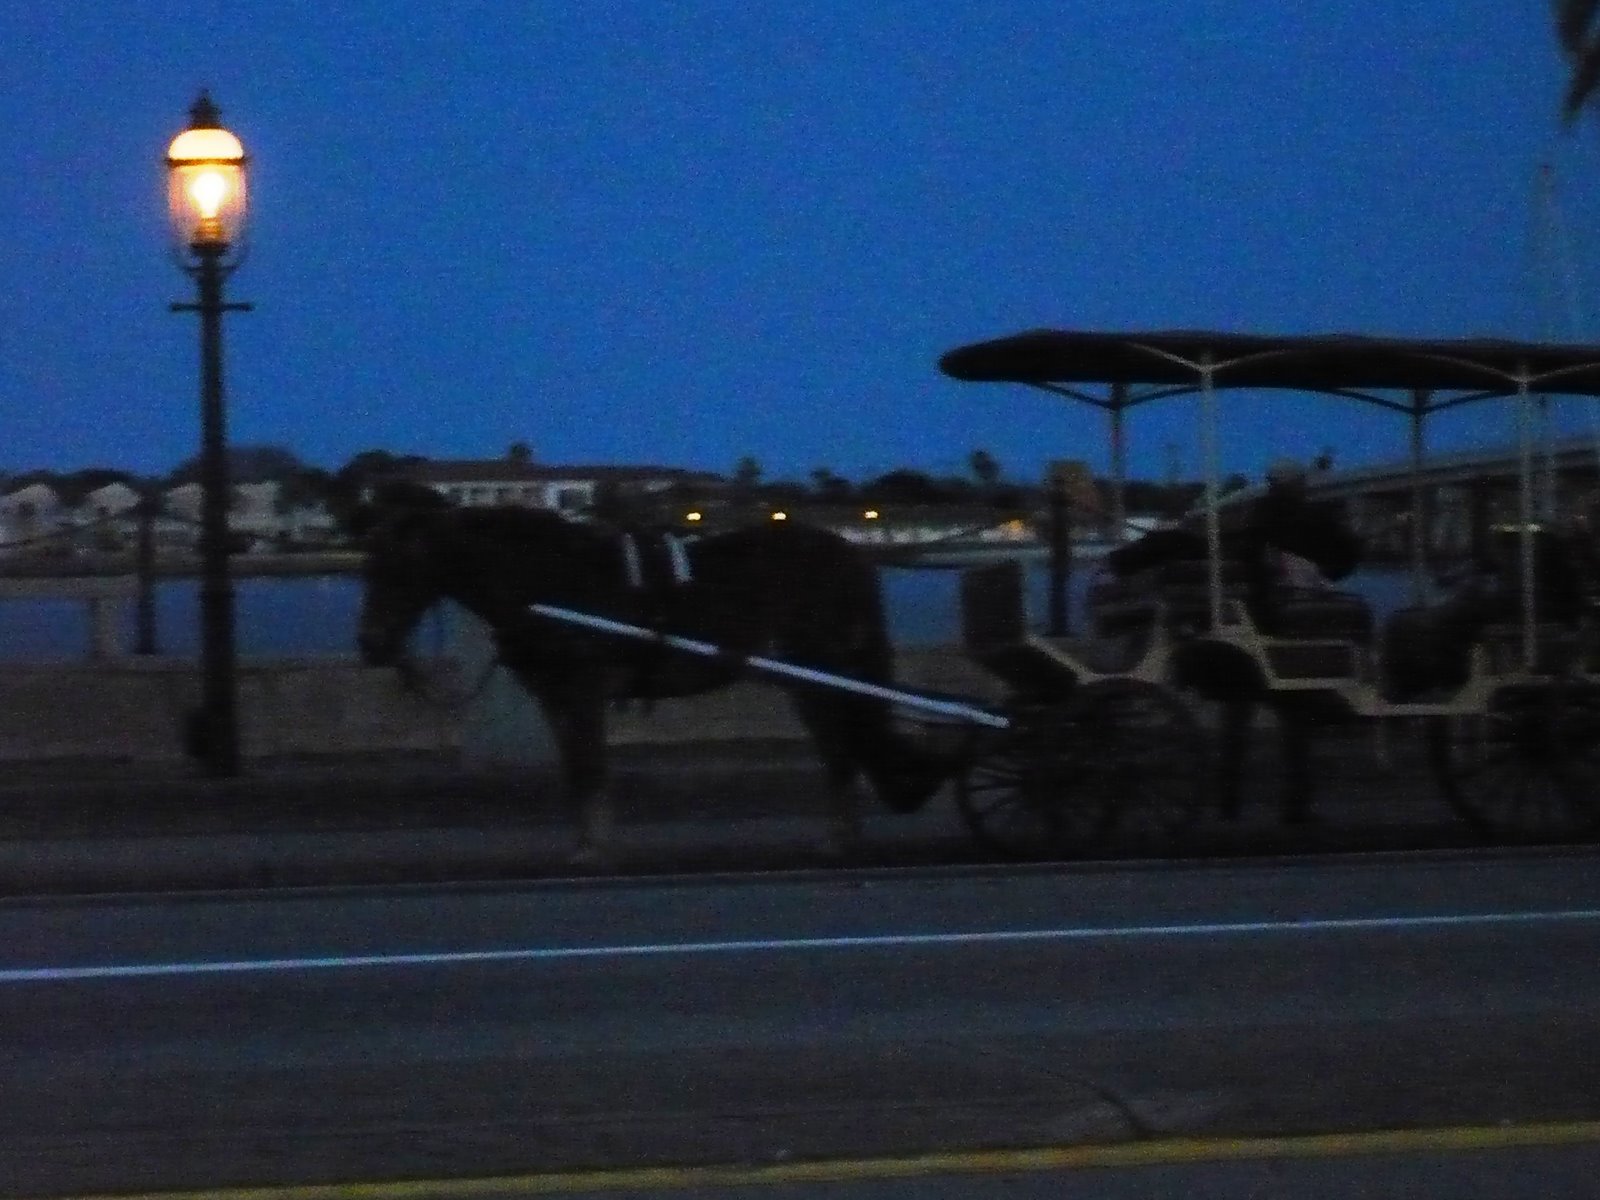 [Carriages+at+night.jpg]